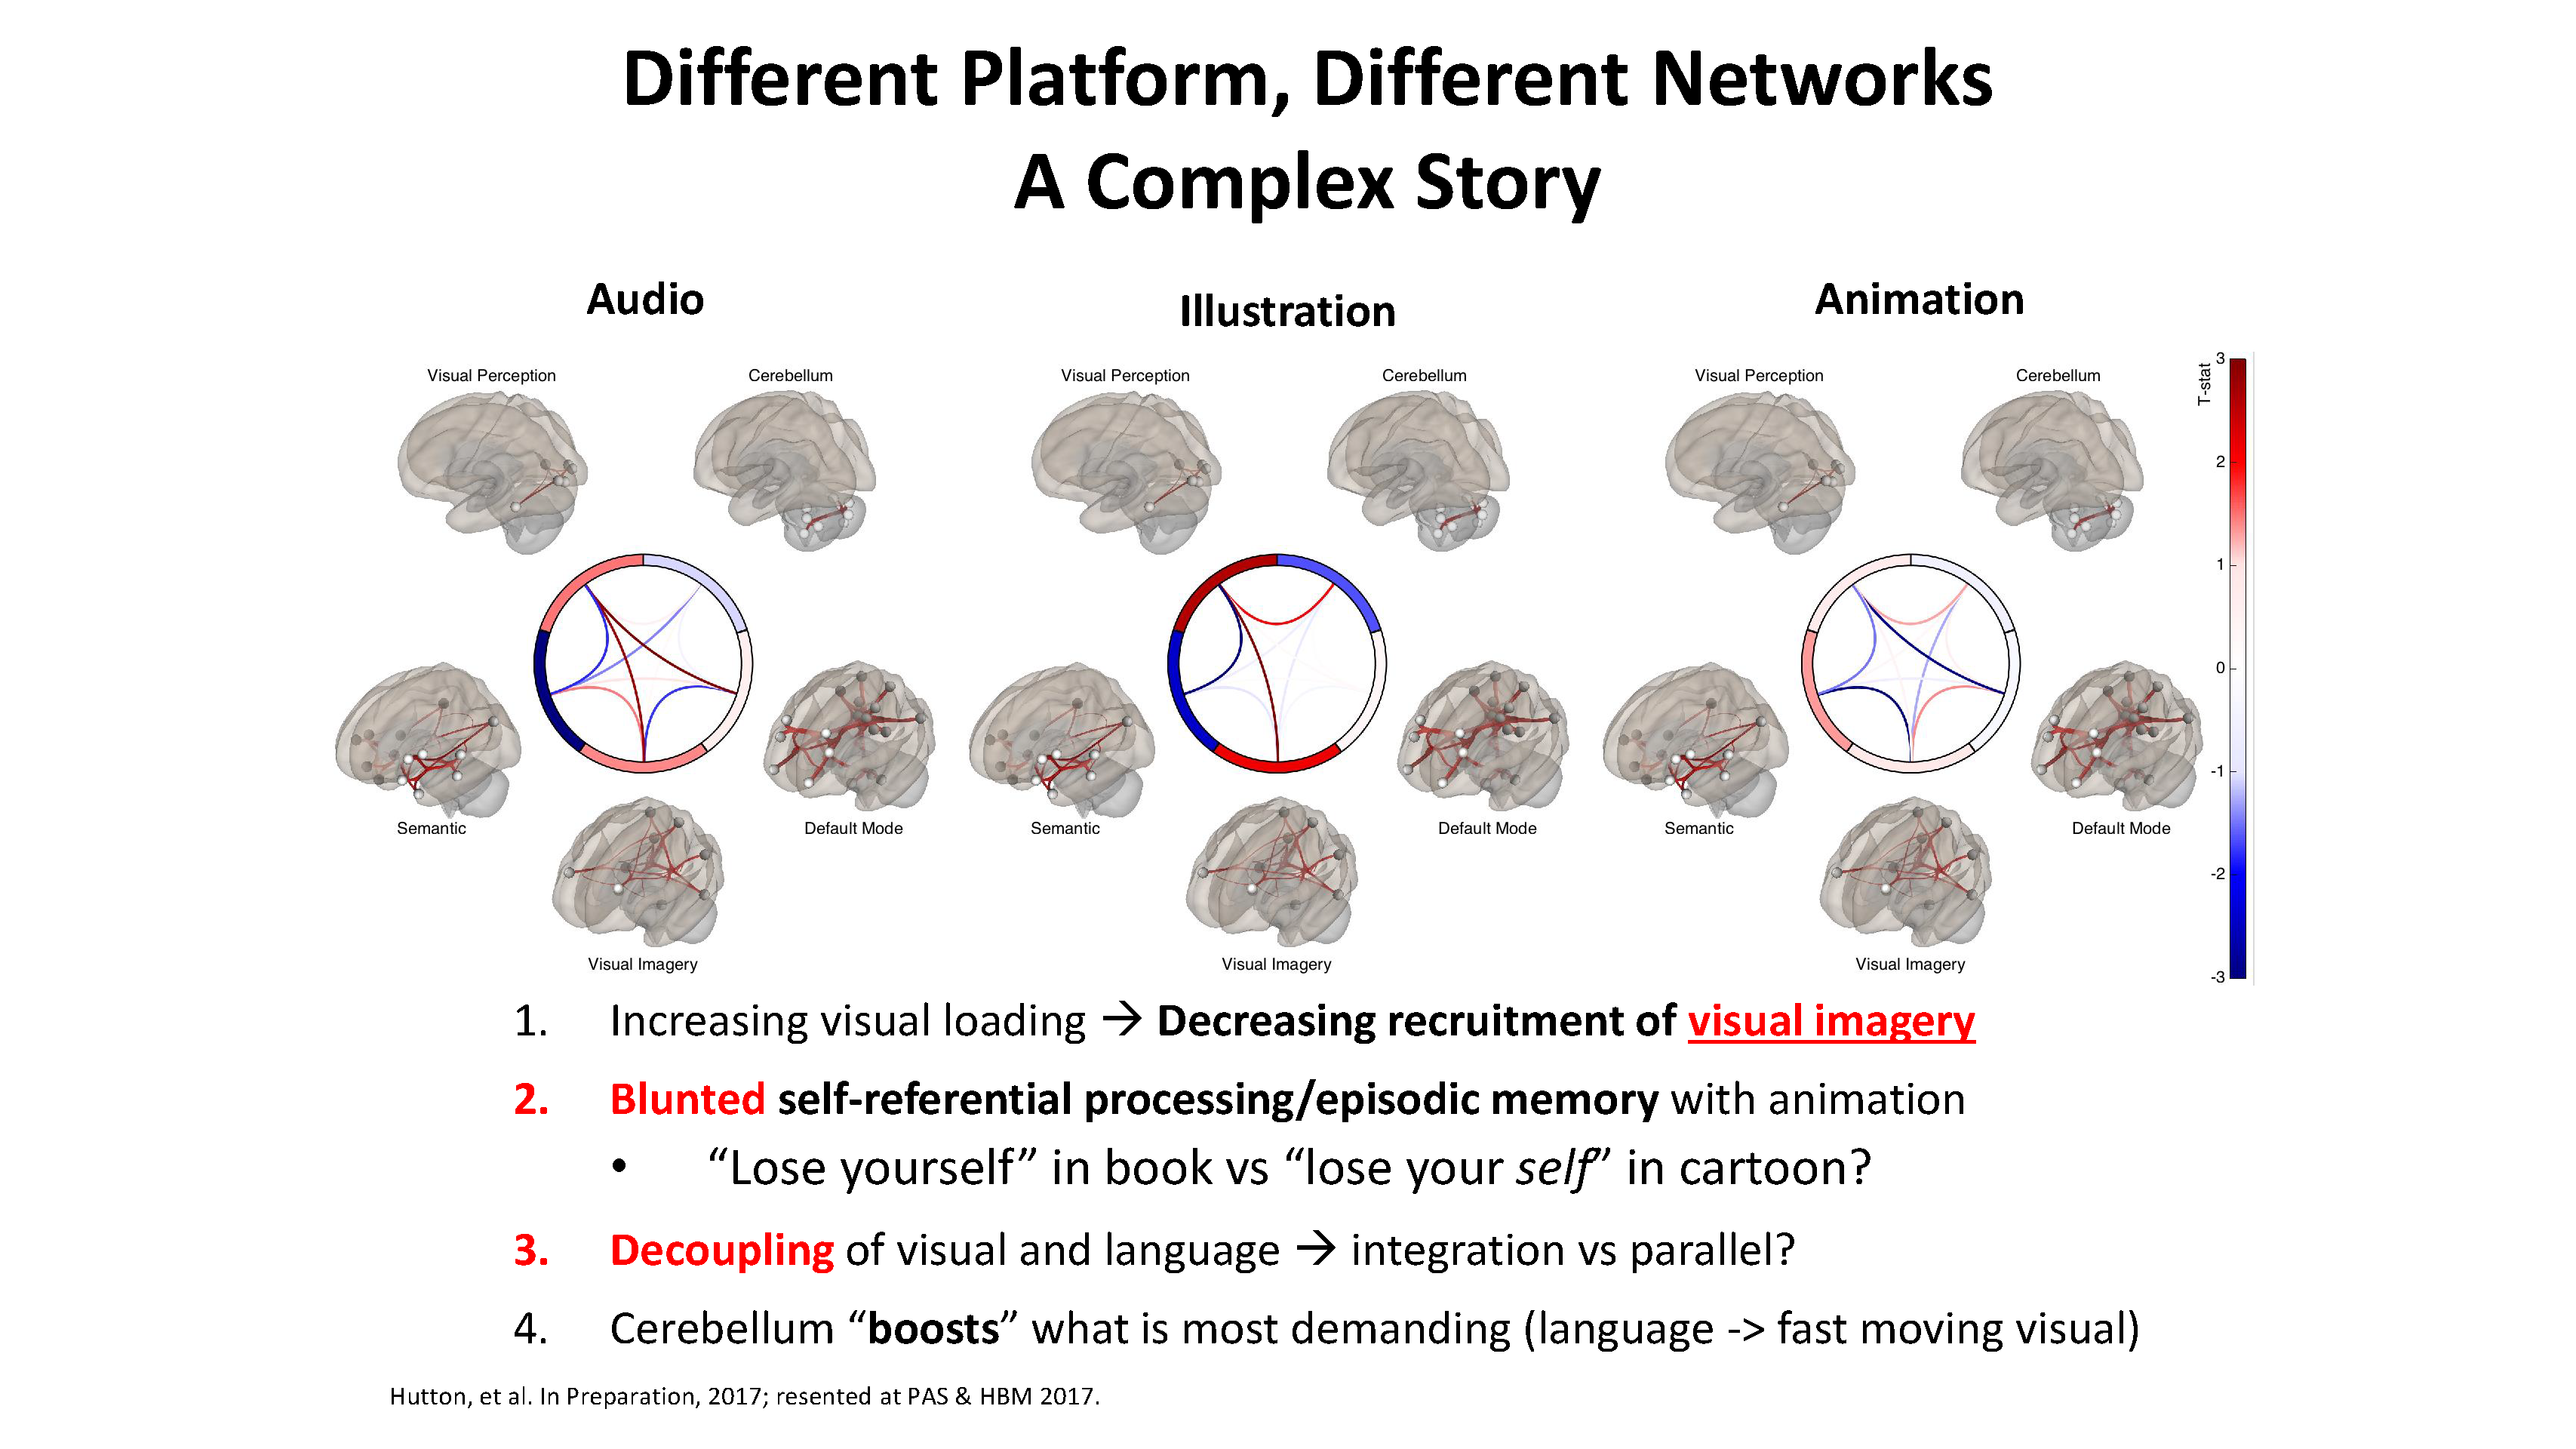 Audio, Illustrated and Animated Stories: Different Platform, Different Networks for Cognitive Stimulation (Dr. John Hutton)